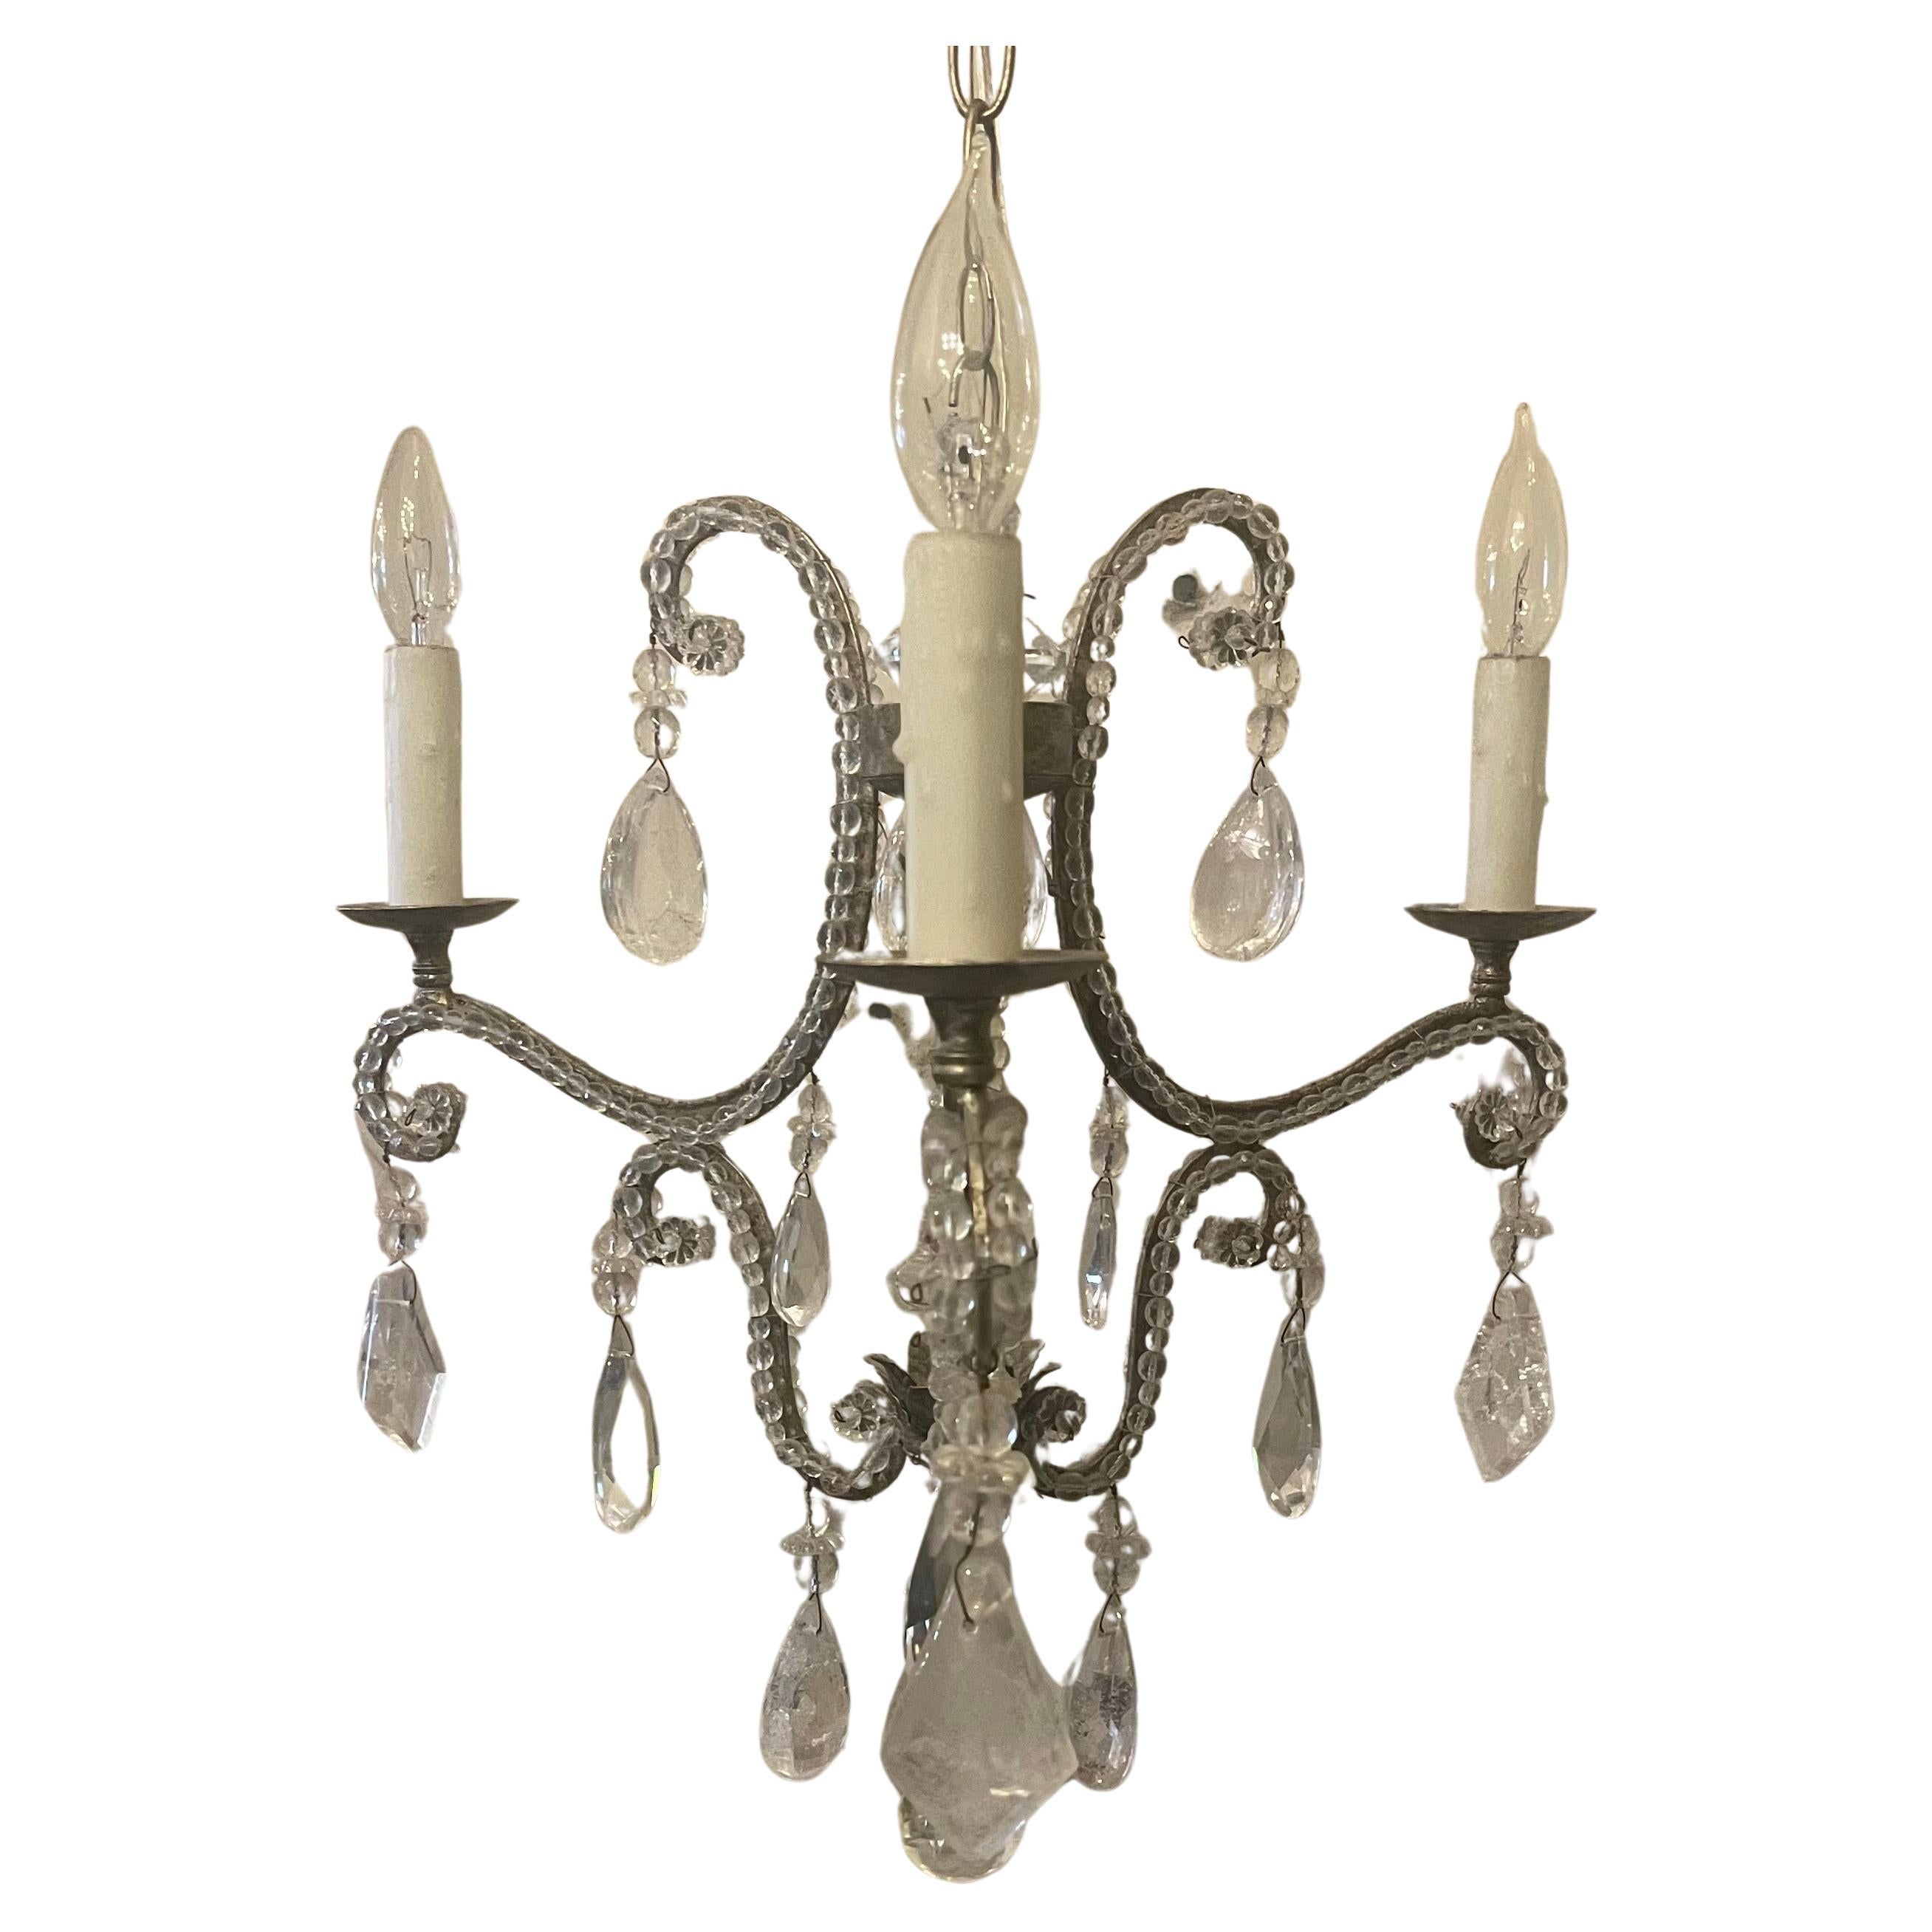 A wonderful Baguès style rock crystal, antique silver gilt and crystal beaded petite chandelier 3 candelabra light fixture centered with a crystal spike and finished on the bottom with a rock crystal ball.
By Dennis & Leen, Accompanied by chain